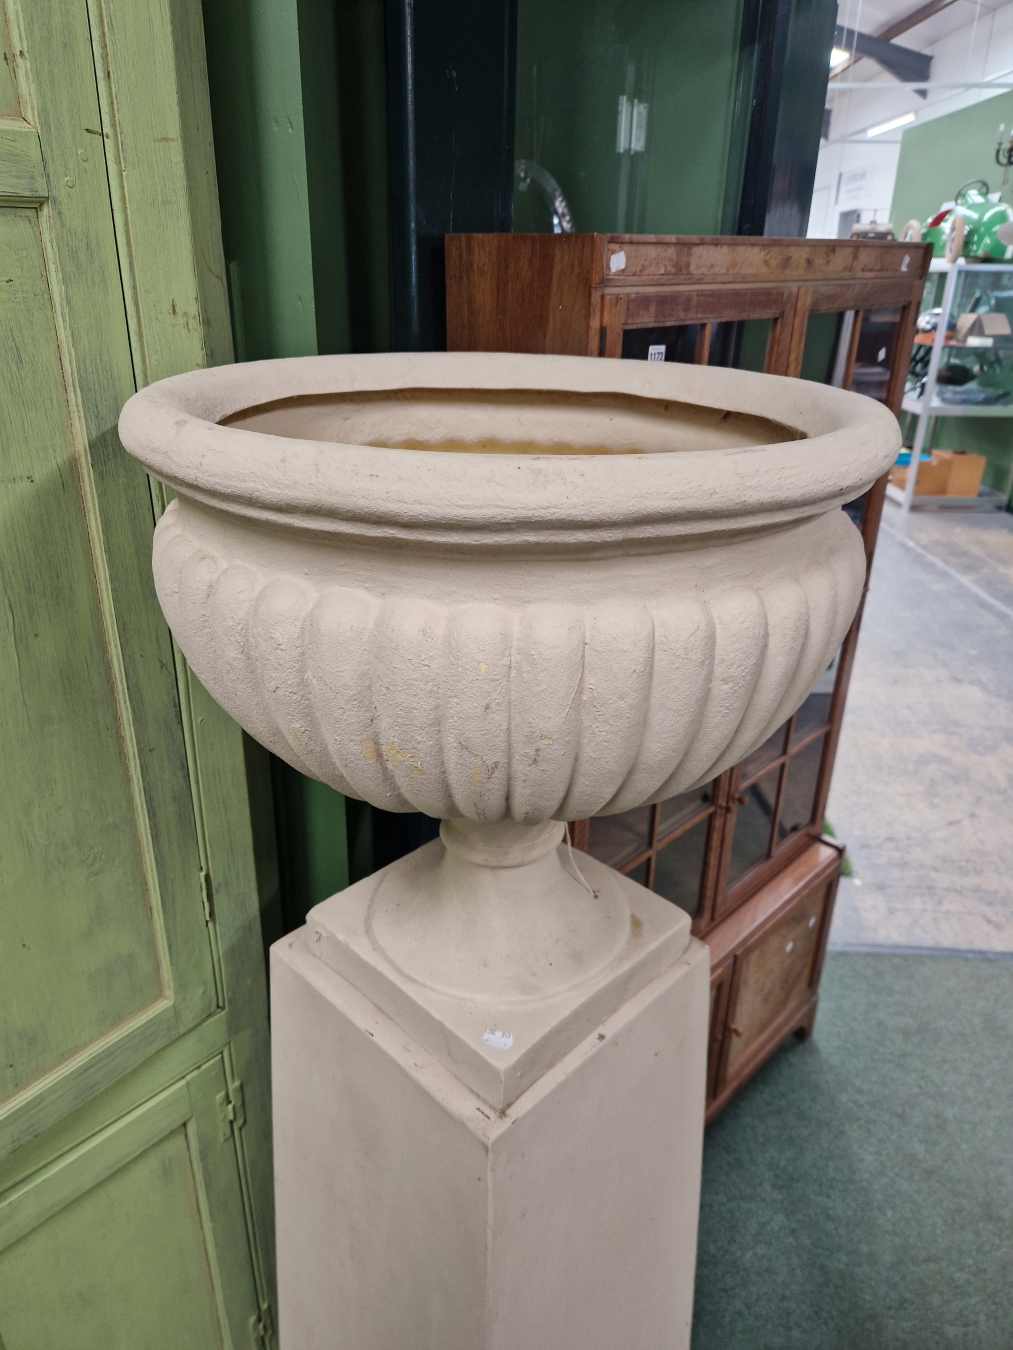 A LARGE TERRACE URN ON PEDESTAL STAND - Image 2 of 2